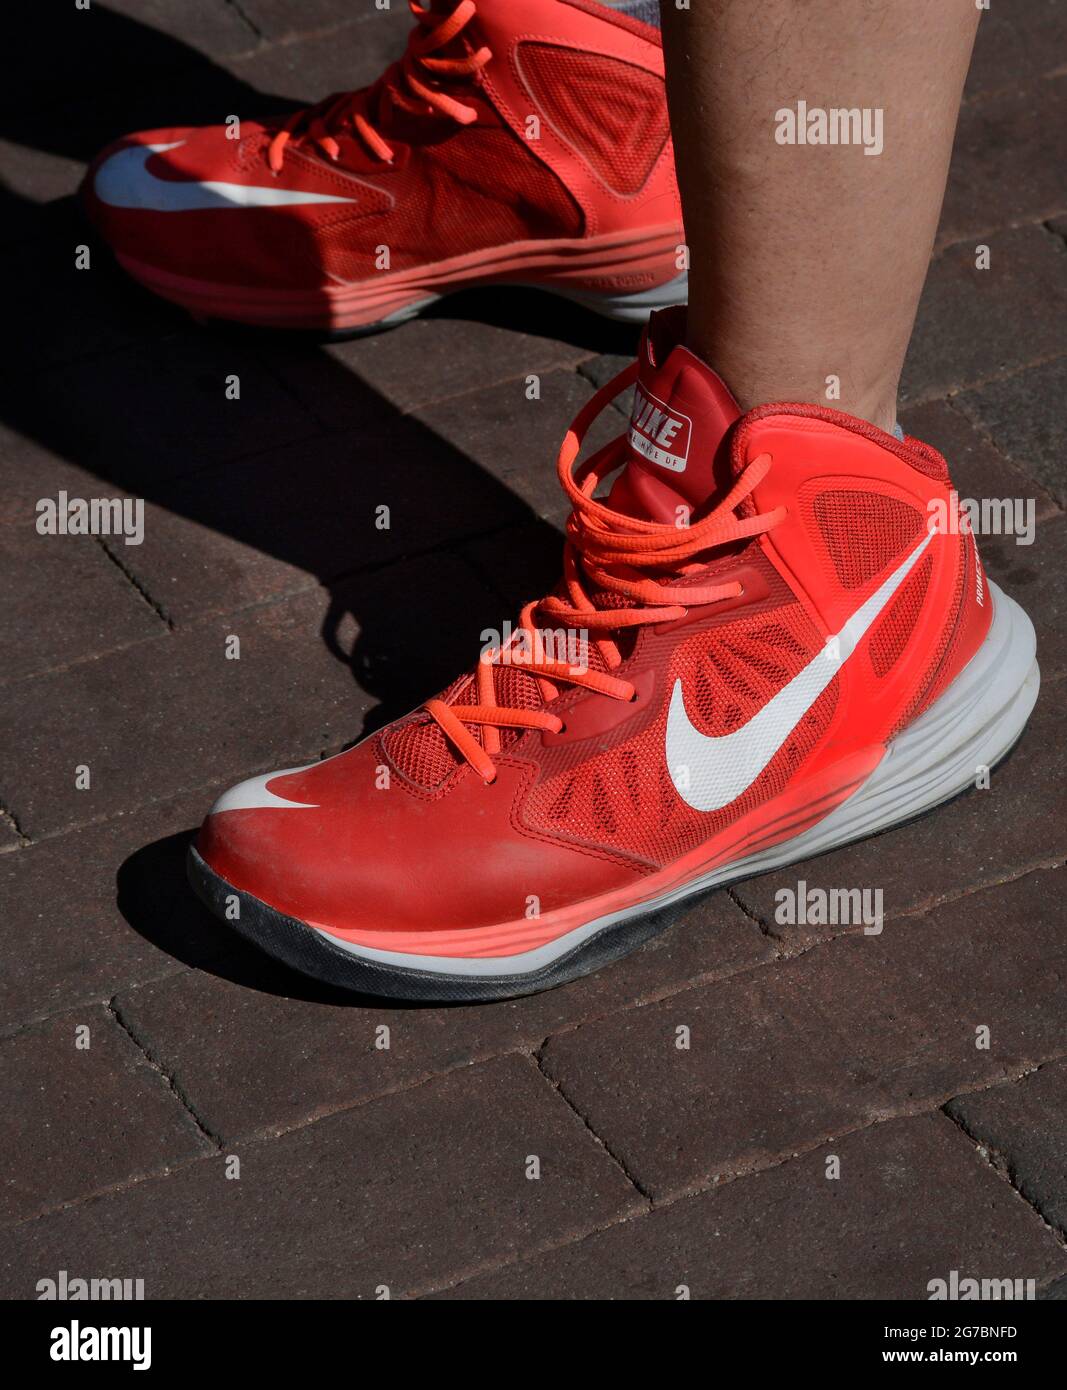 A man wears a pair of red Nike Prime Hype DF tennis or athletic shoes in  Santa Fe, New Mexico Stock Photo - Alamy